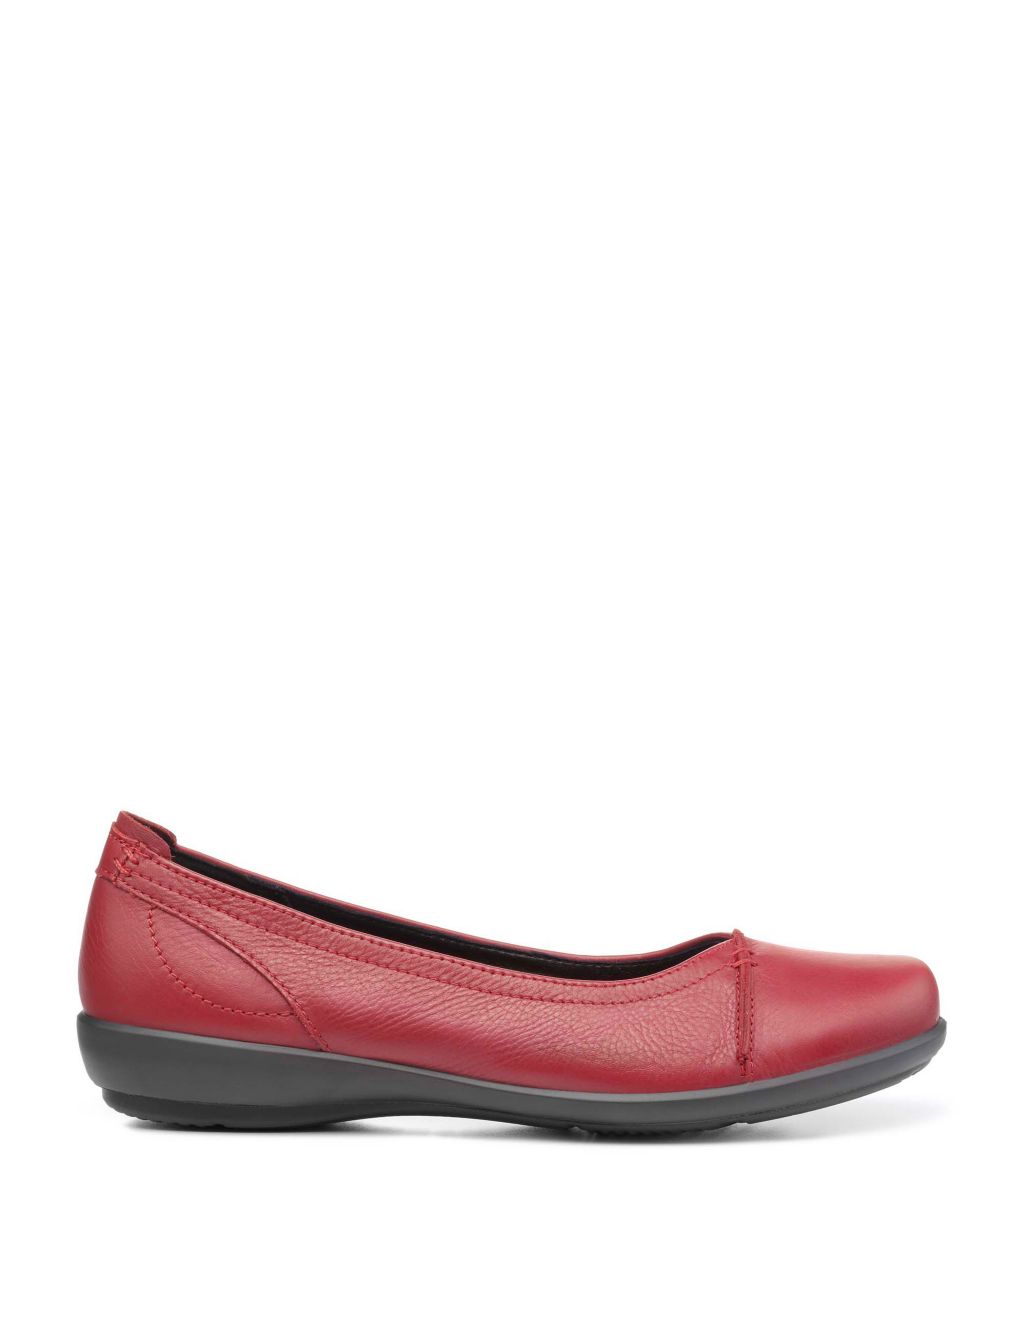 Robyn II Leather Ballet Pumps